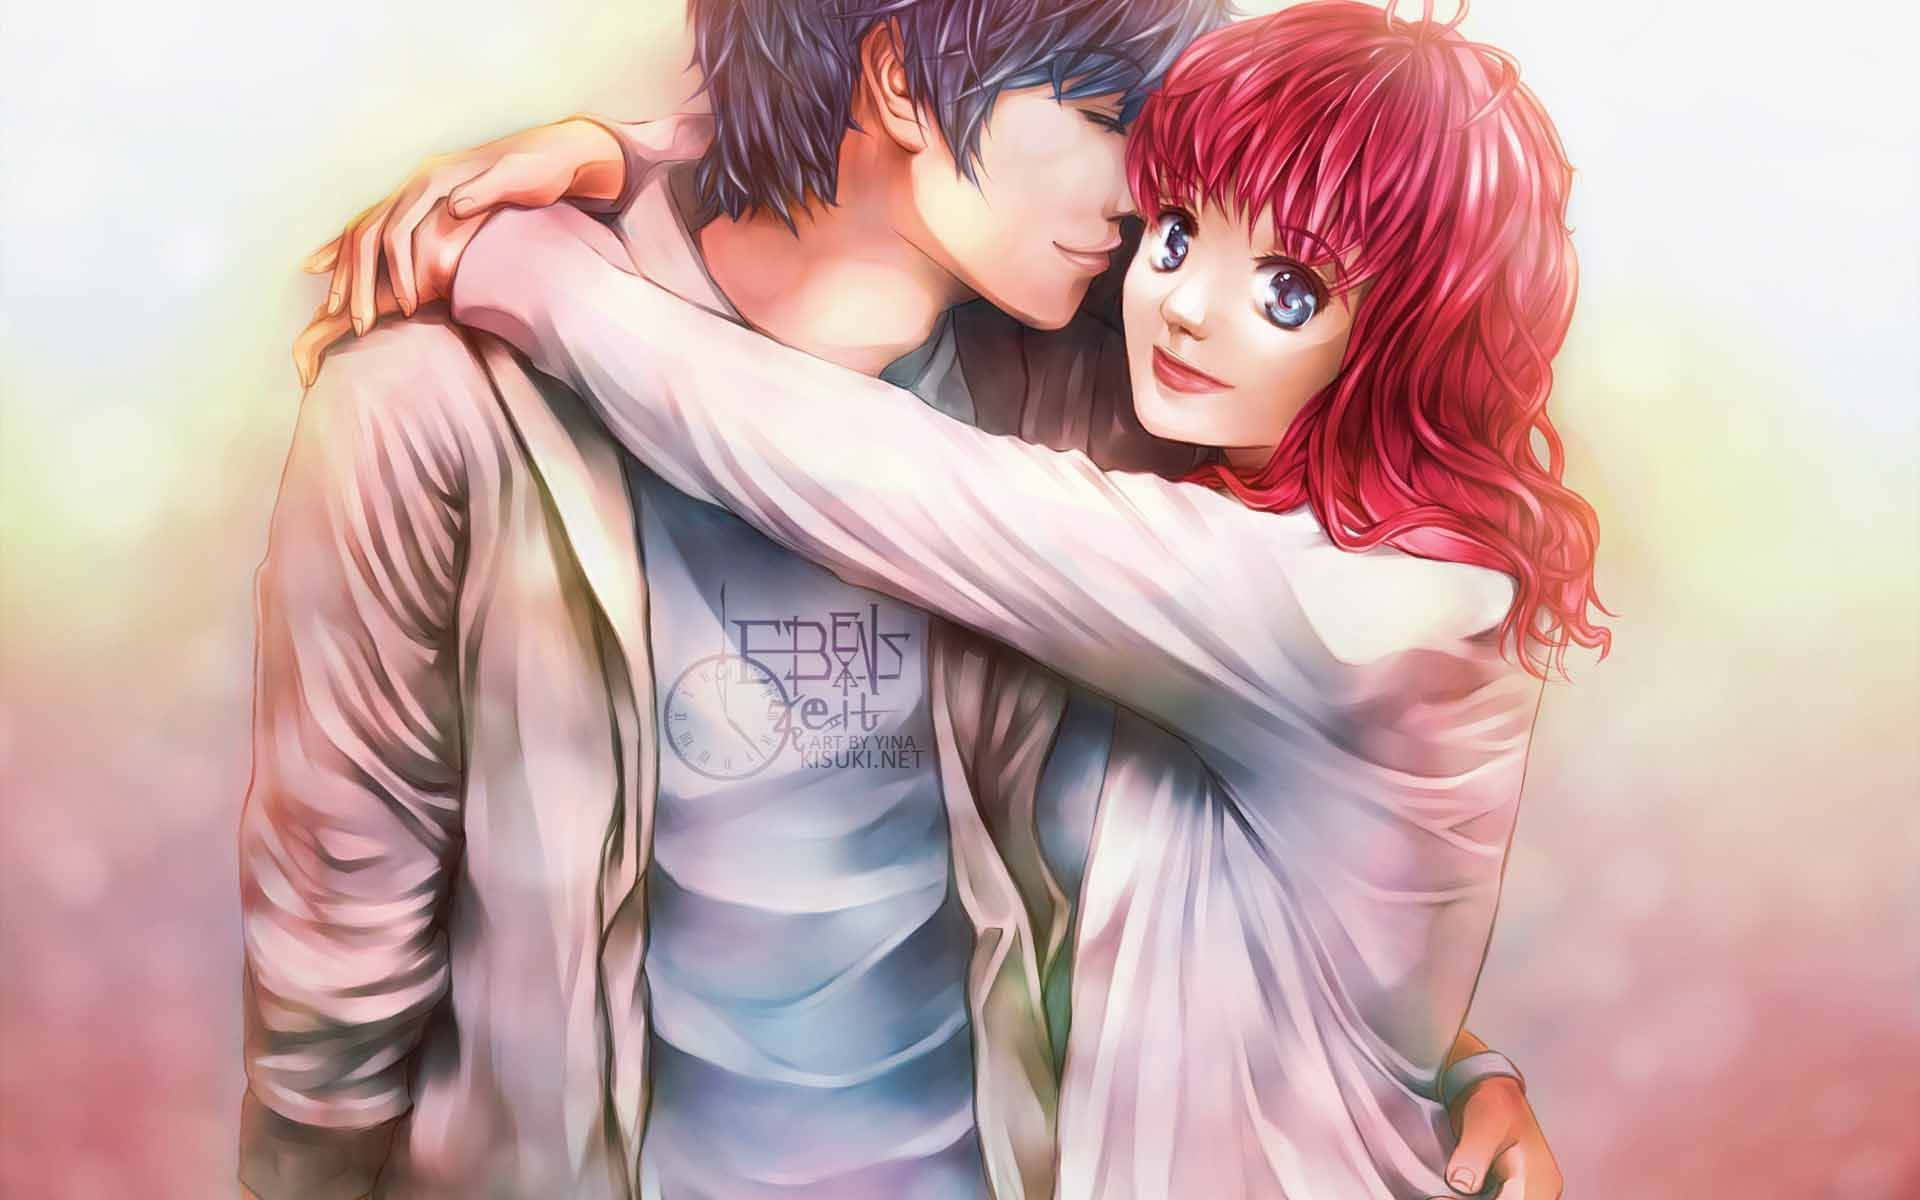 Aesthetic couple in anime style, living in love and harmony Wallpaper